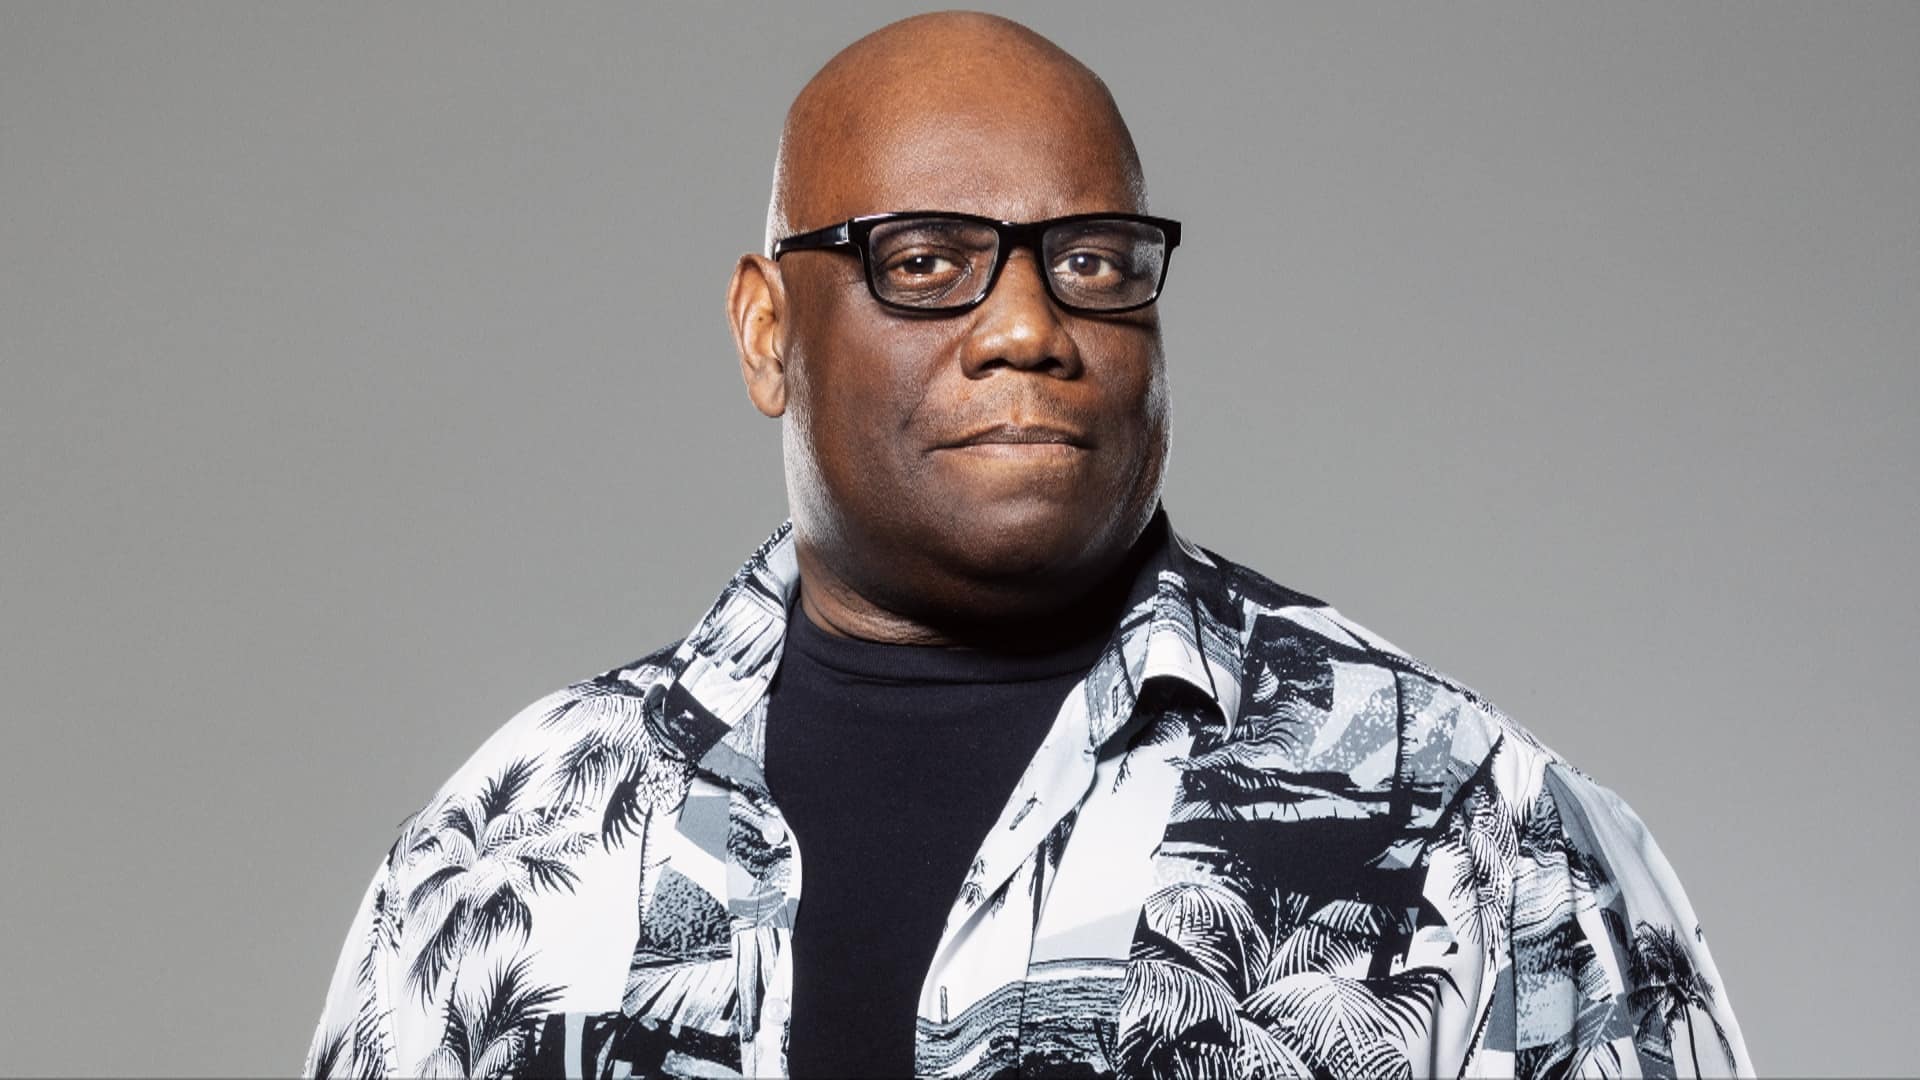 Carl Cox gets remixed by Chase & Status for new single